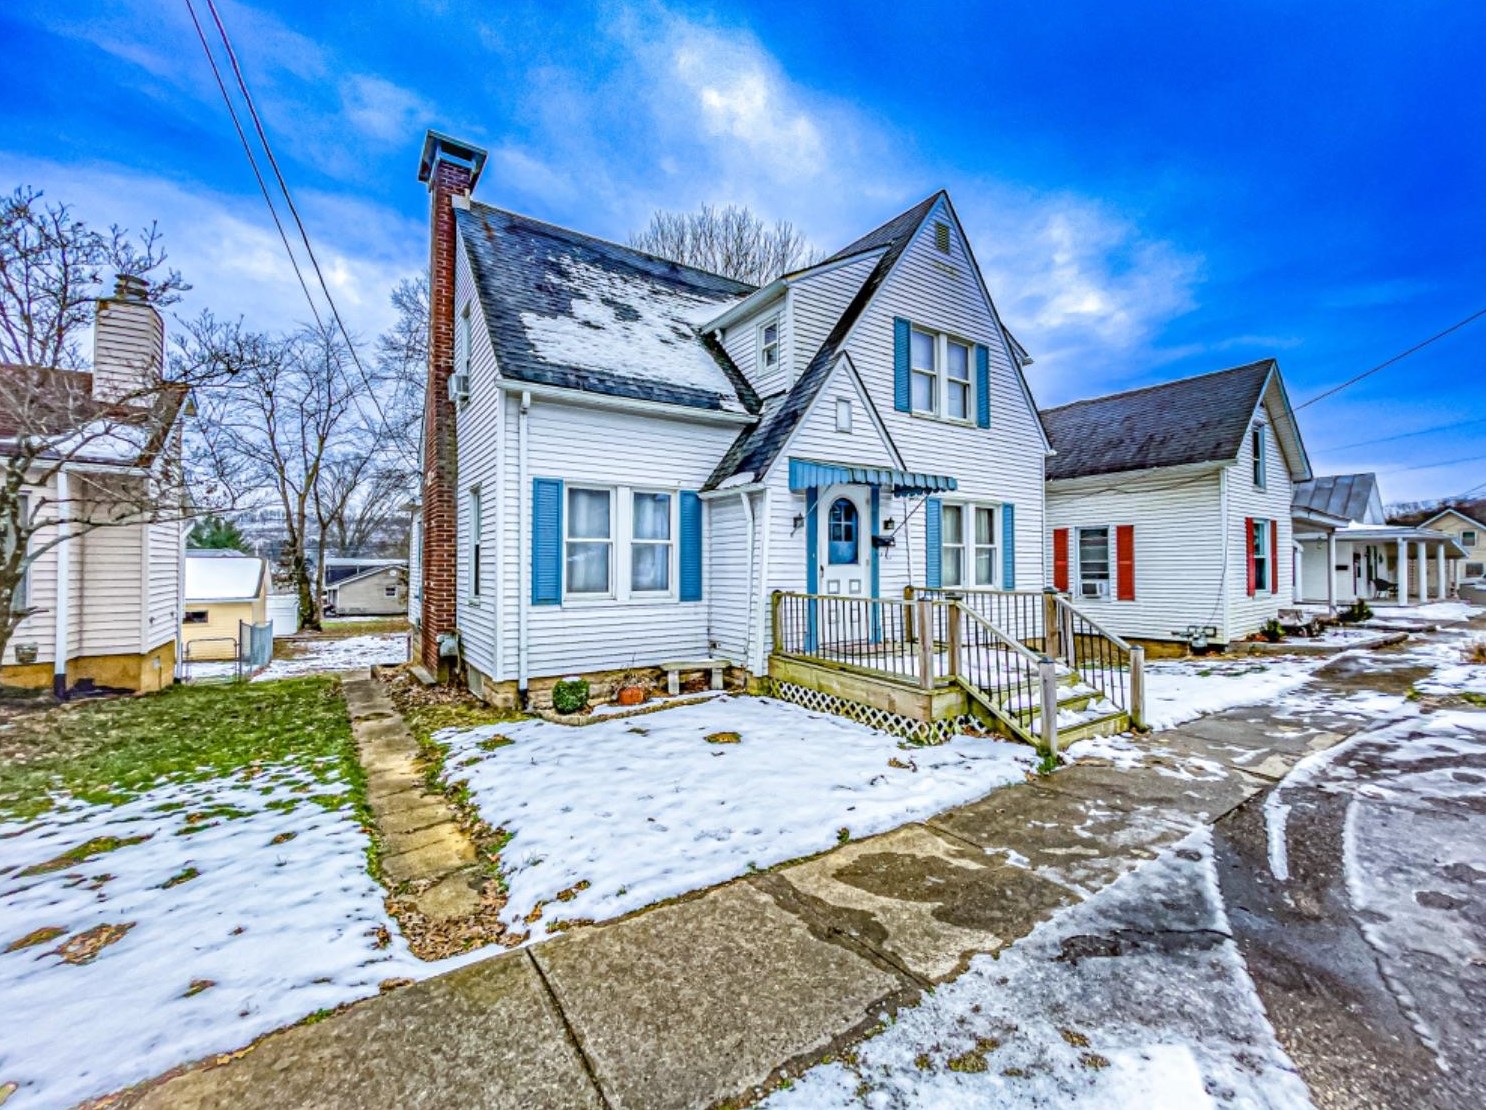 204 W 8th St, Wrightsville, OH 45144